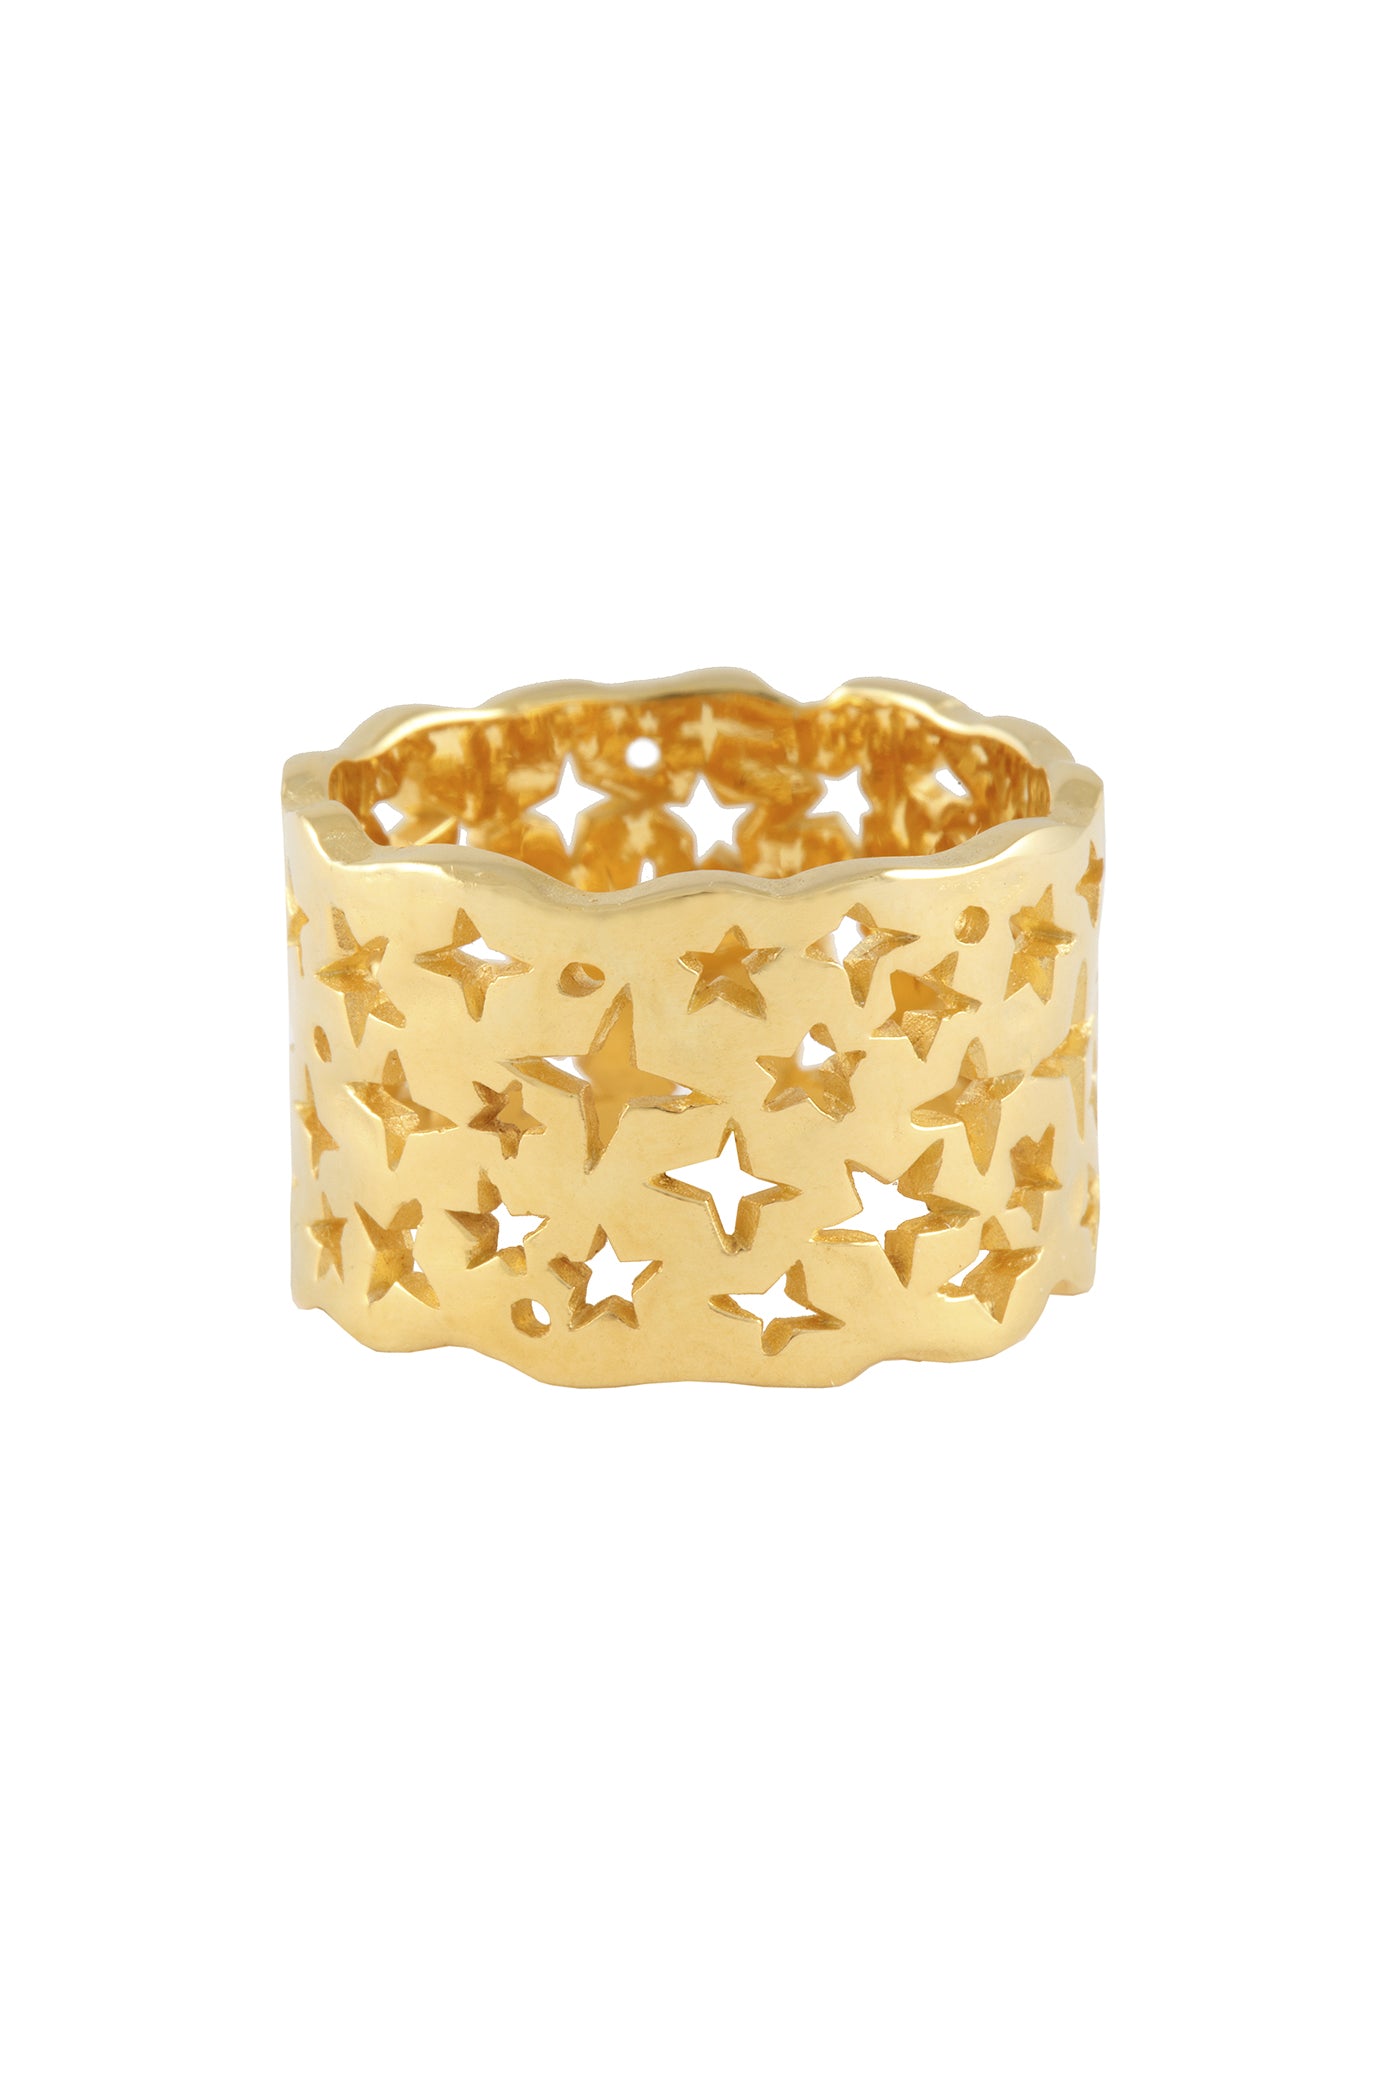 Milky way ring. Gold plated